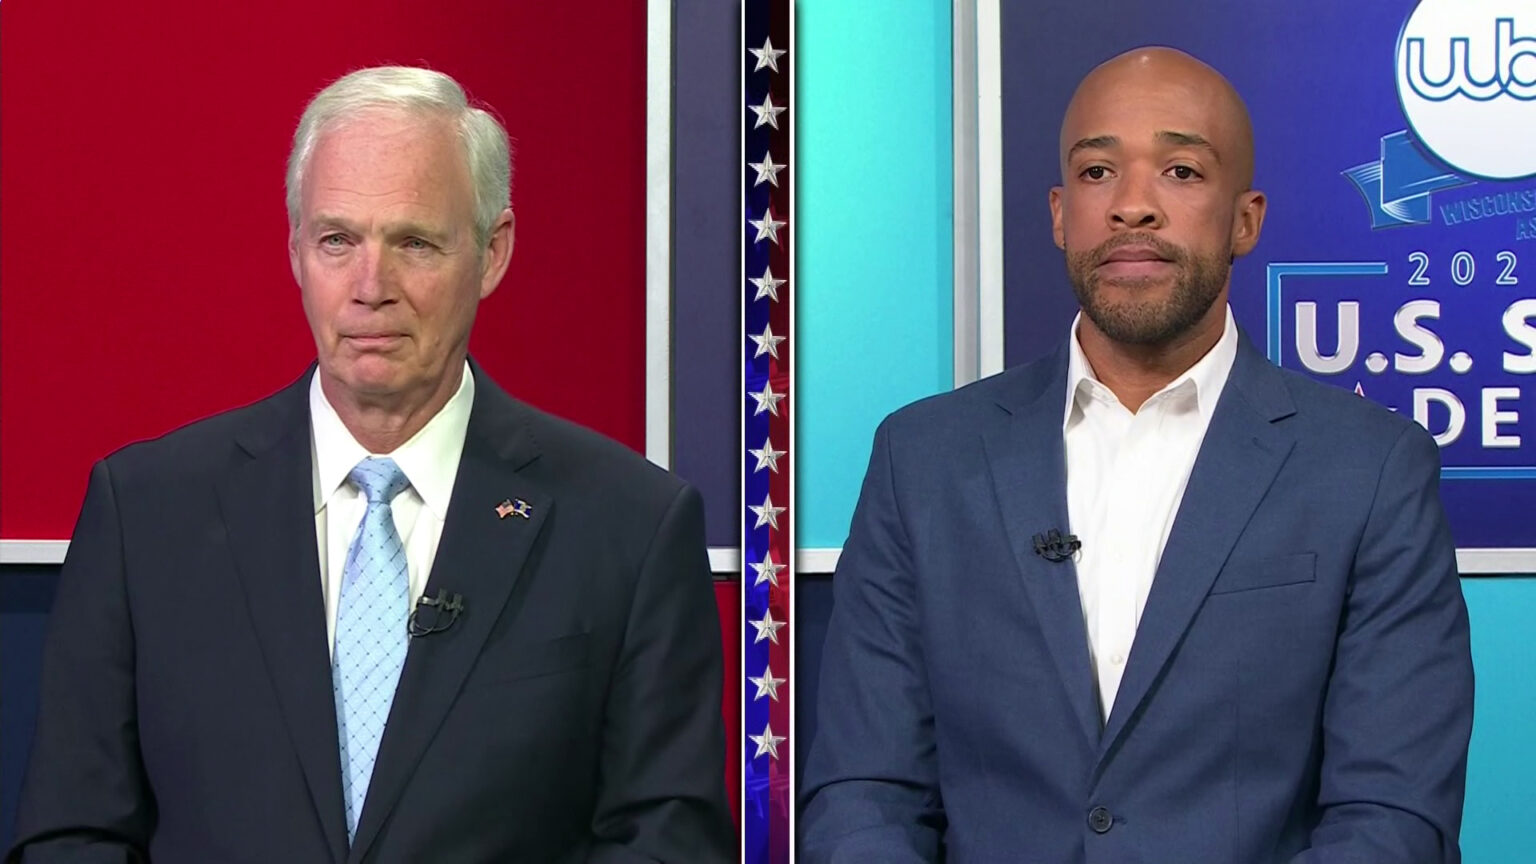 A split screen shows Ron Johnson and Mandela Barnes in different areas of a stage set.